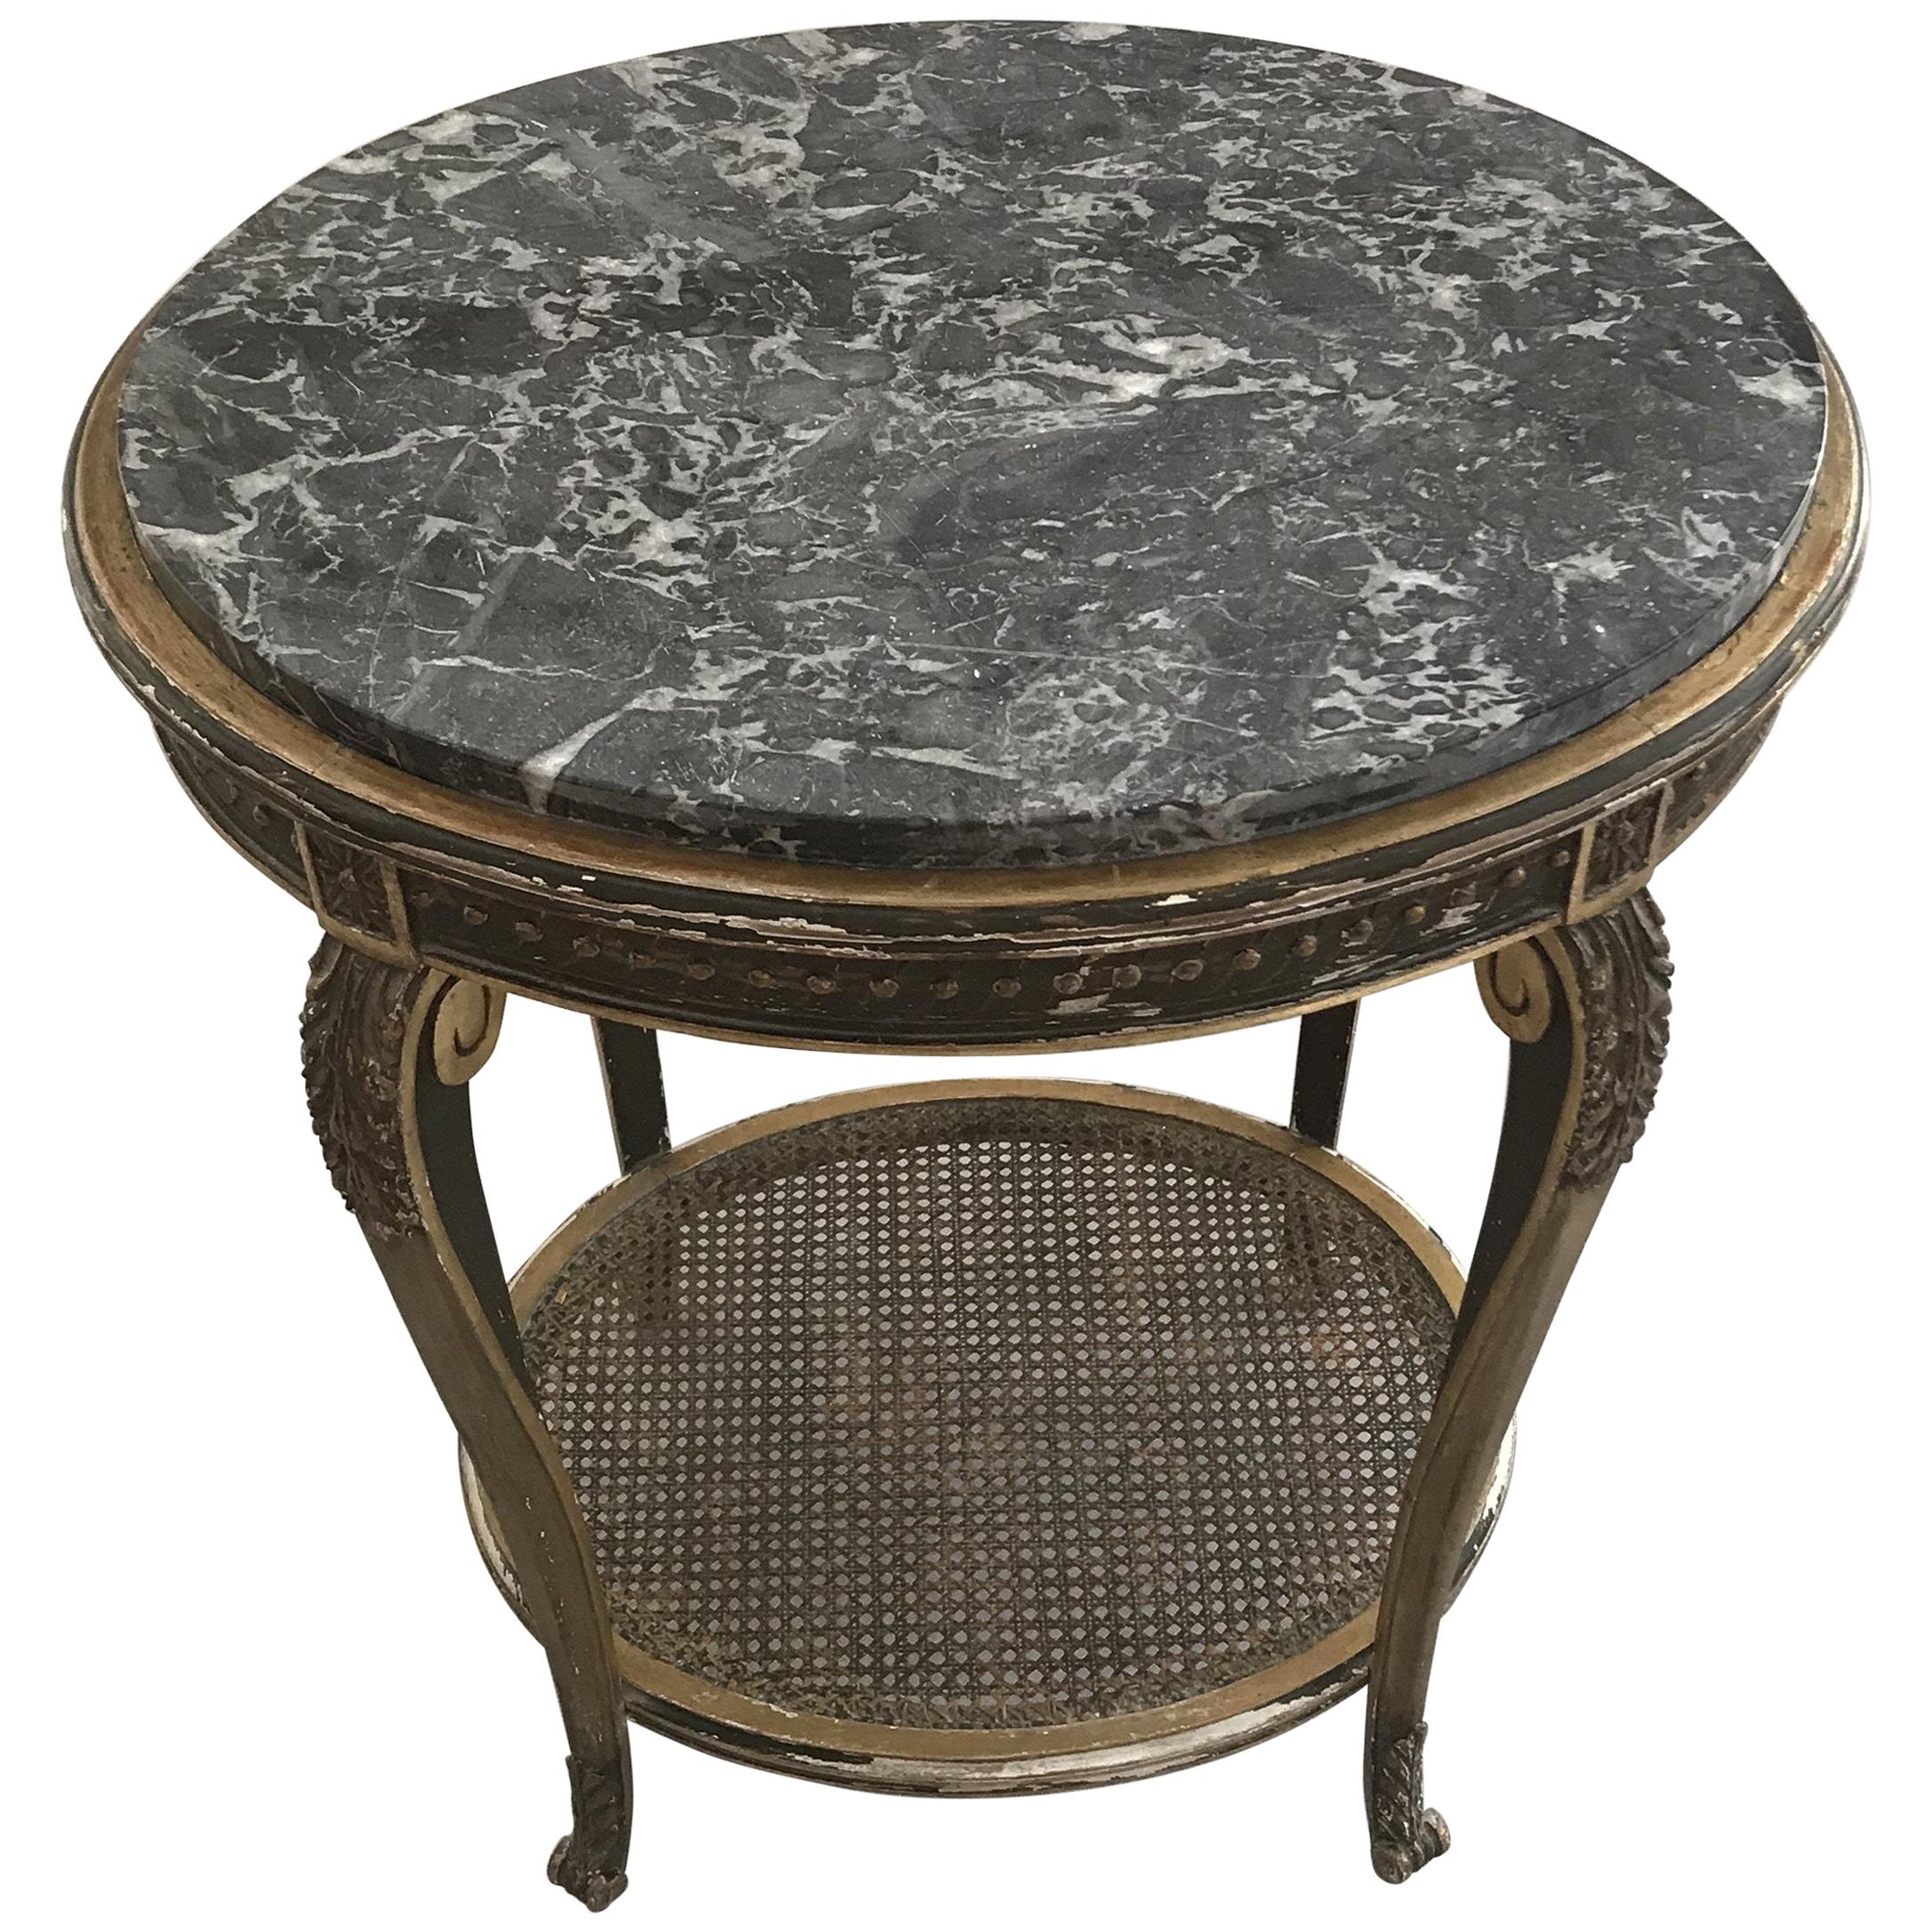 Gorgeous Gold Giltwood Oval Side Table with Marble Top